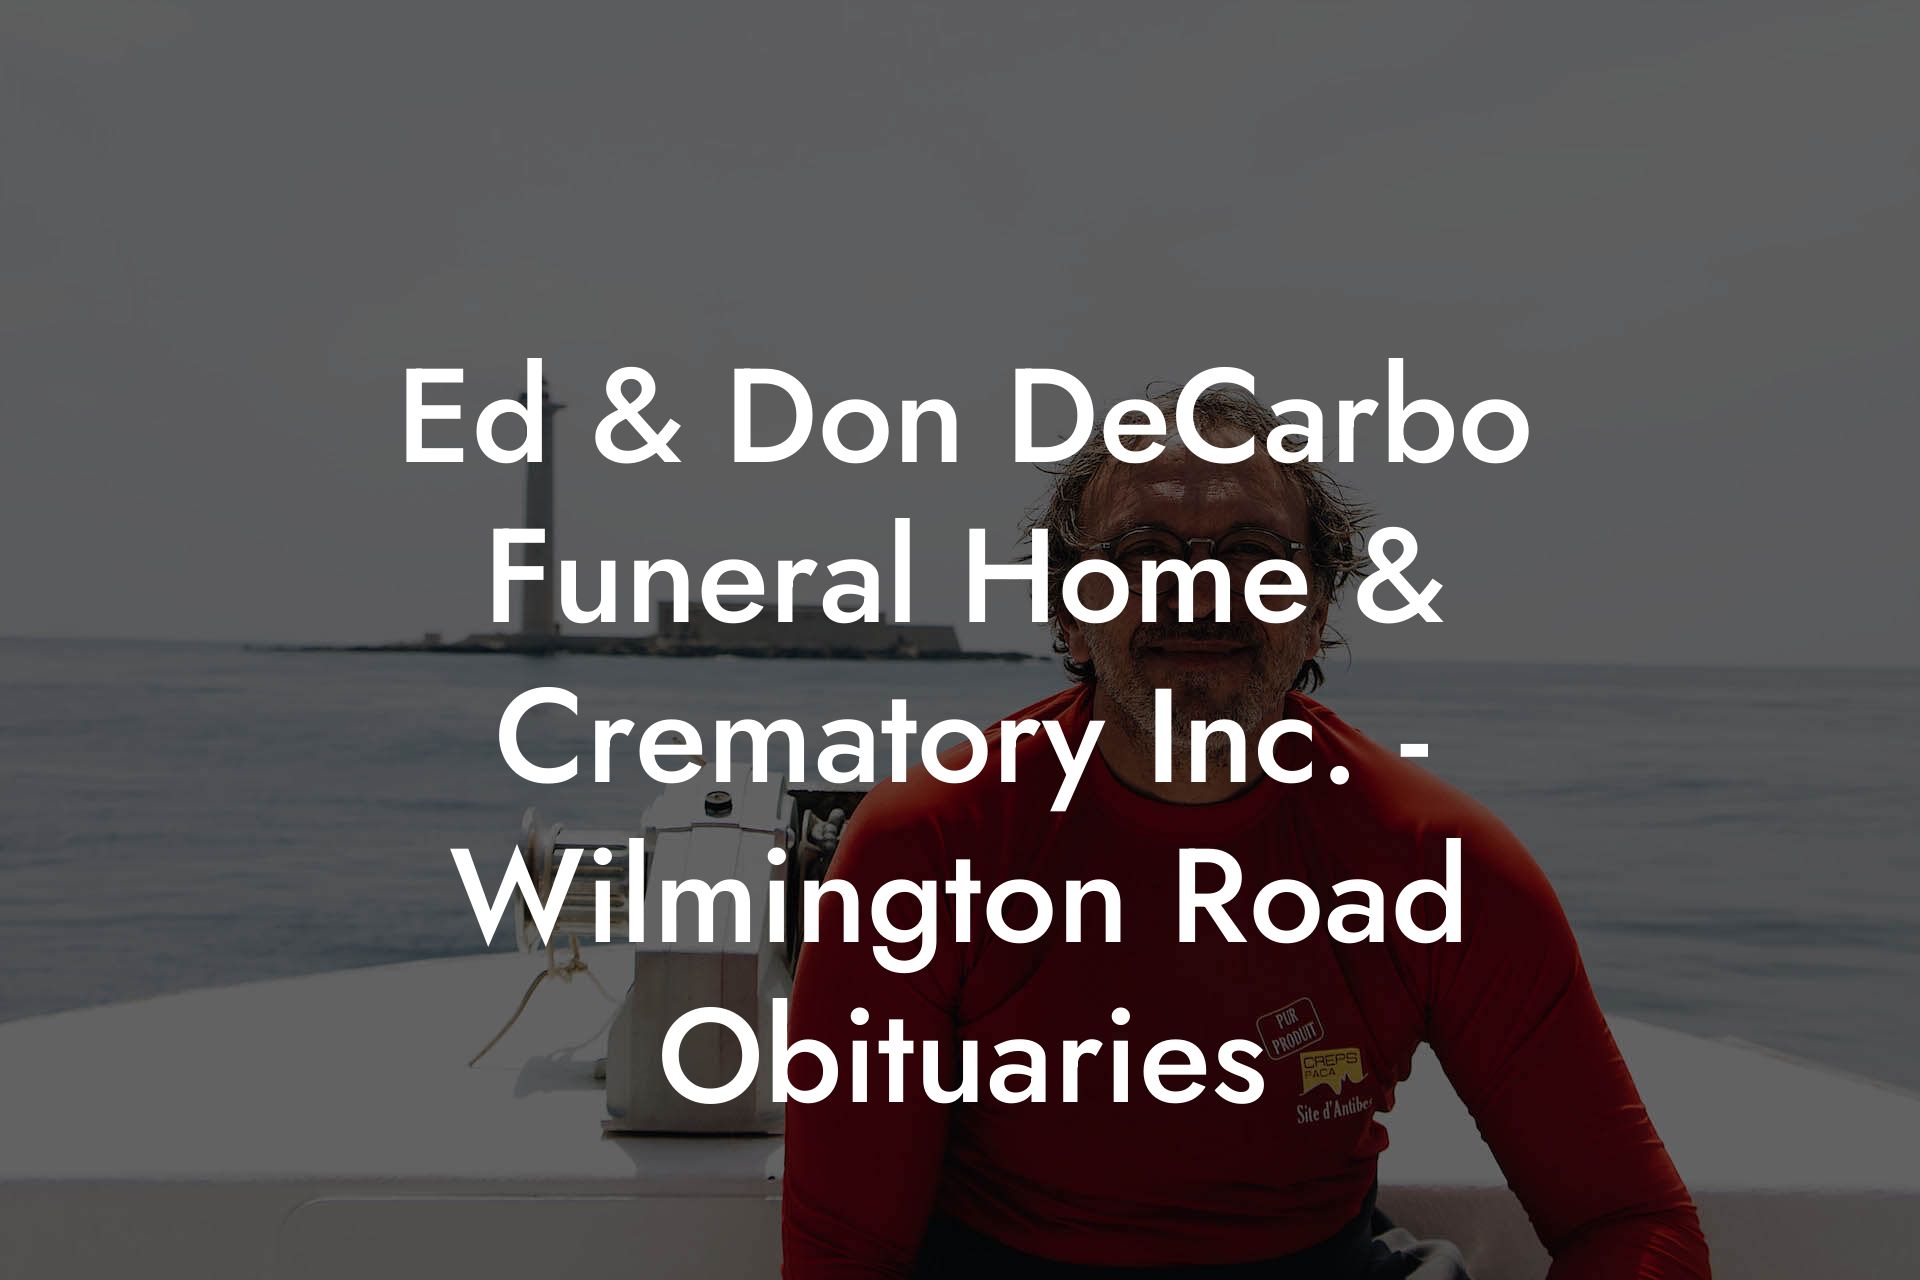 Ed & Don DeCarbo Funeral Home & Crematory Inc. - Wilmington Road Obituaries